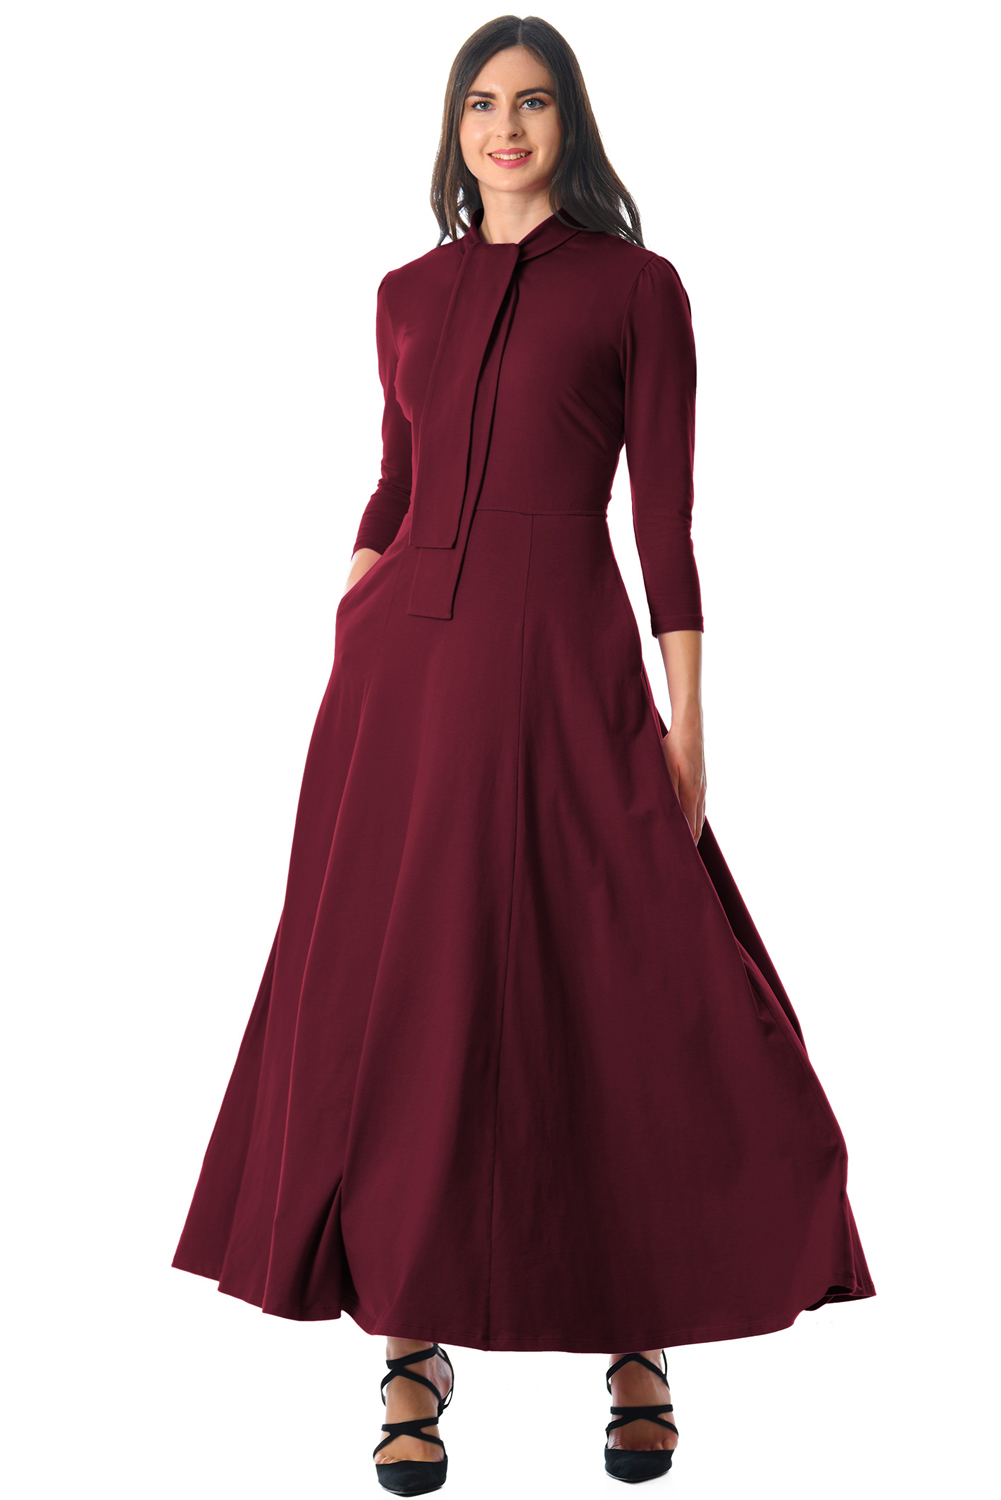 BY610398-3 Burgundy Pocketed  Sleeves Tie Neck Maxi Dress